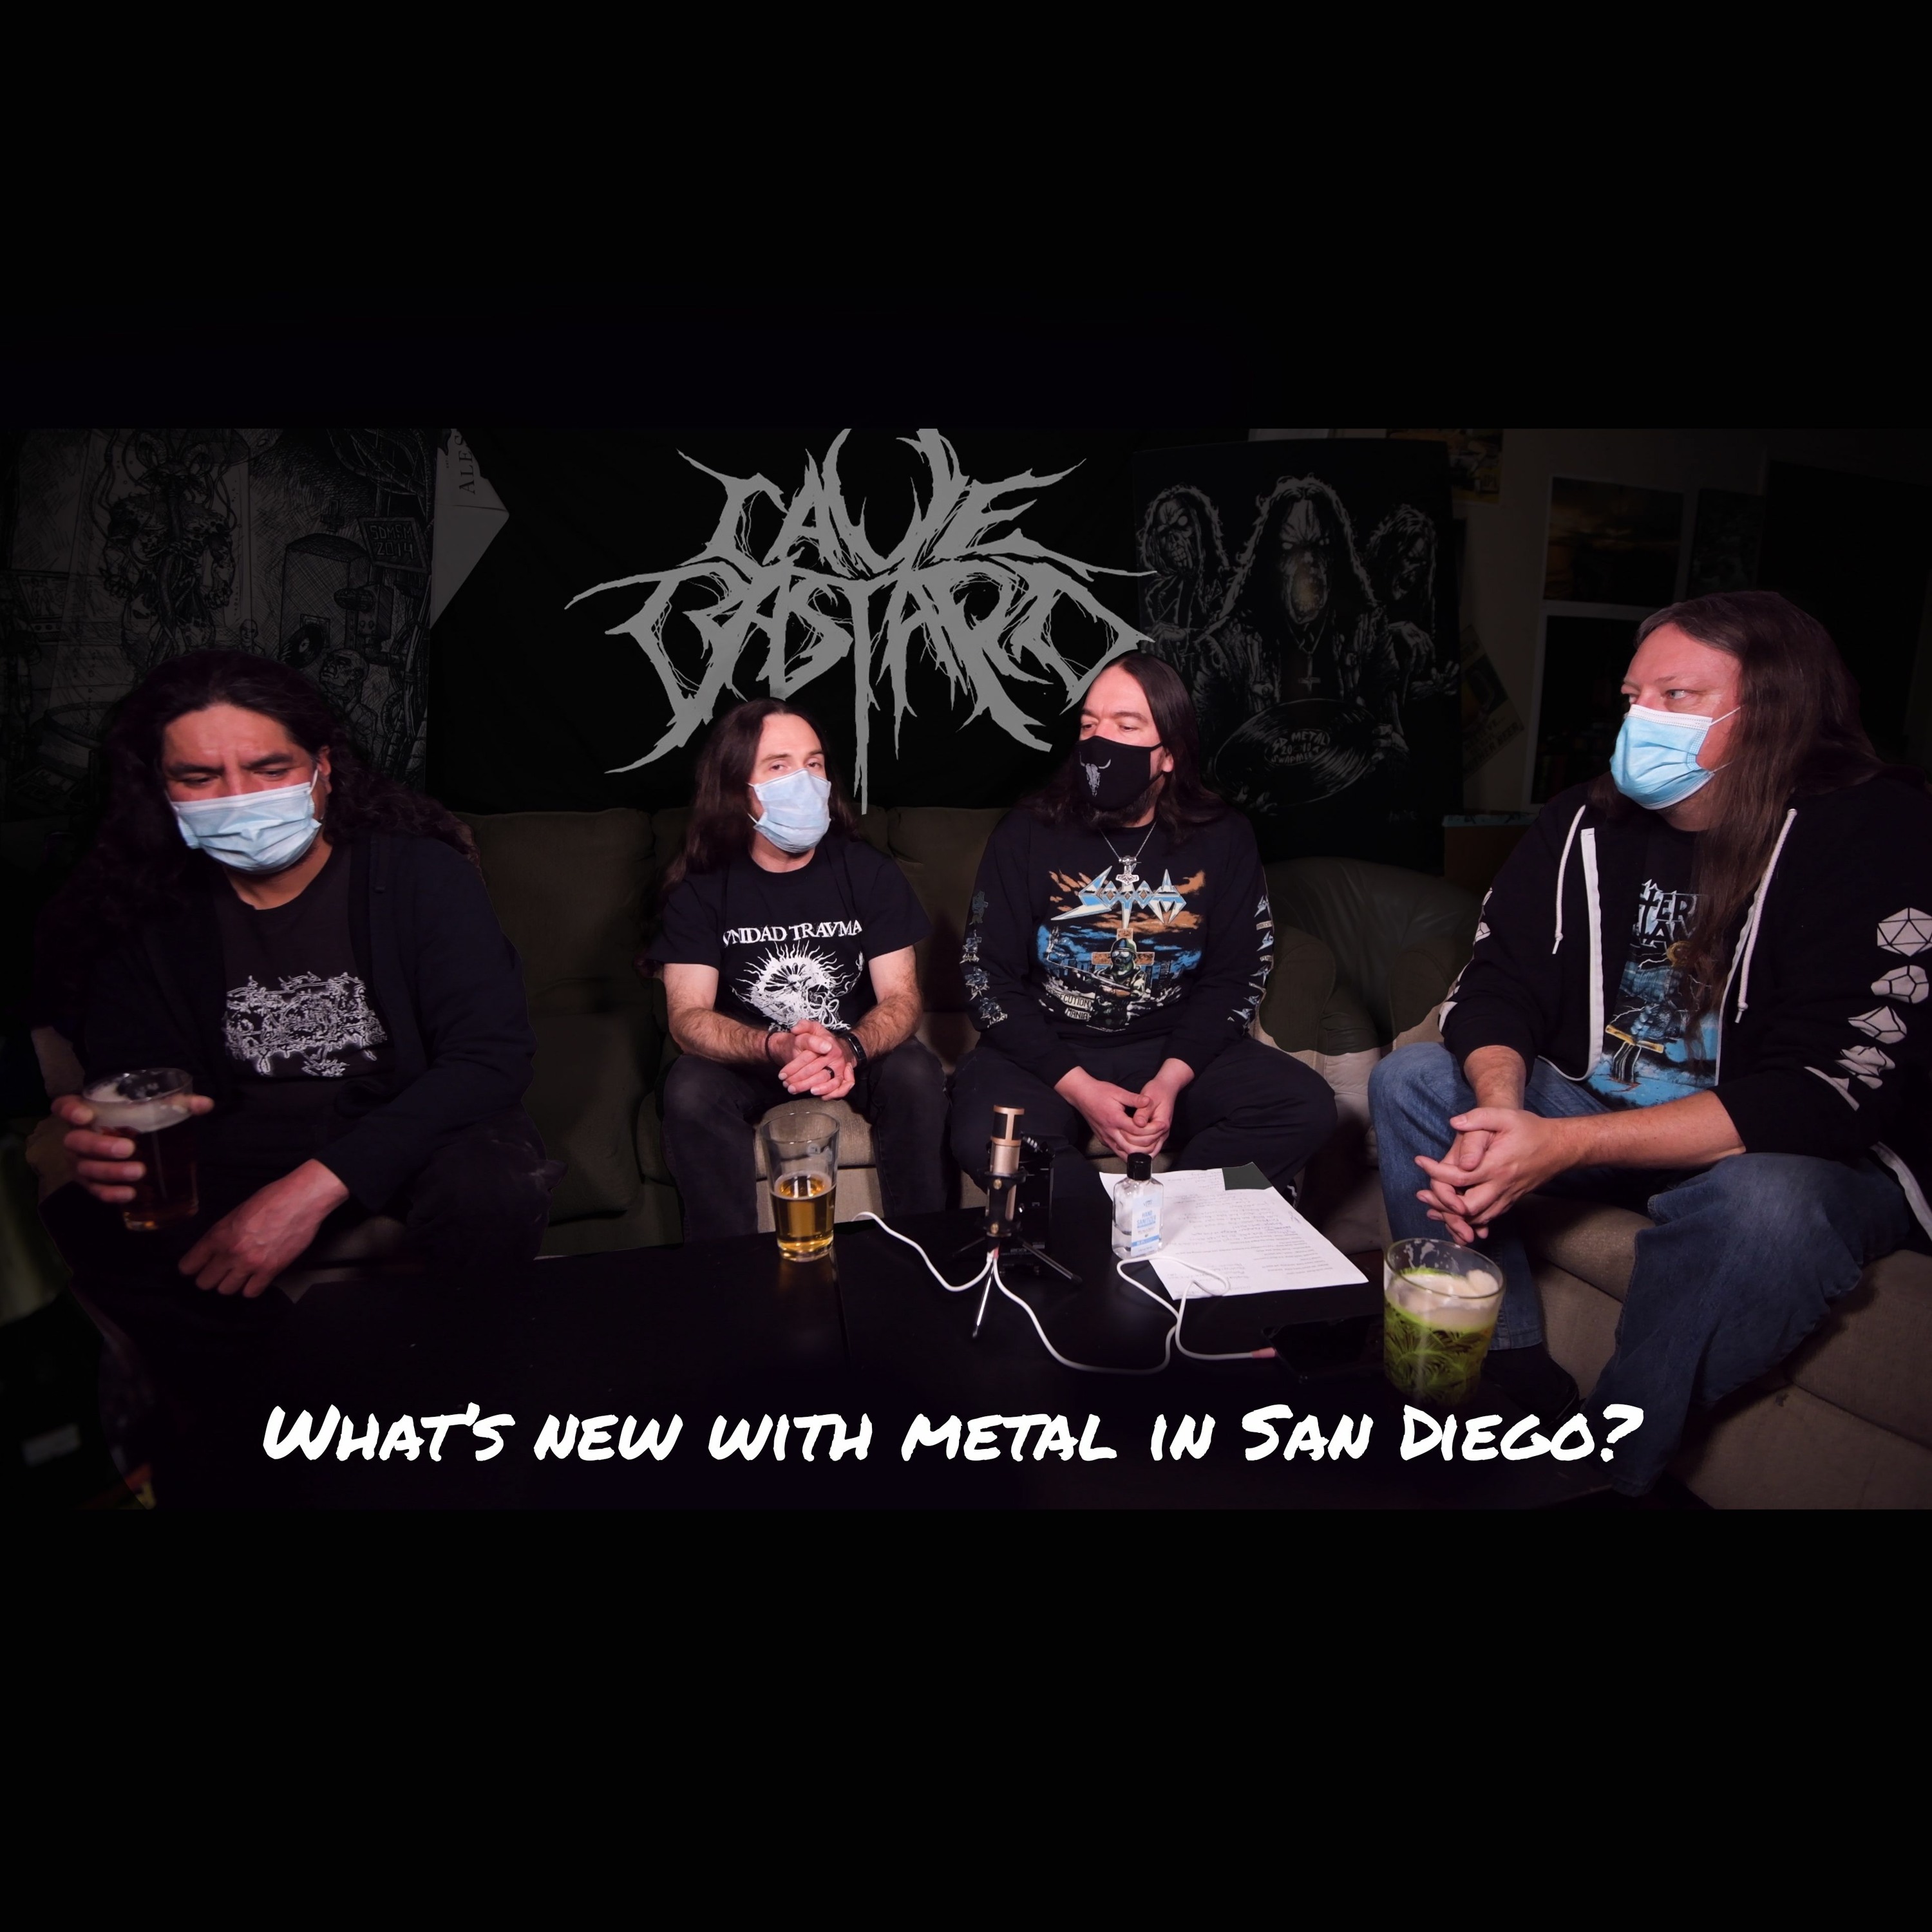 What’s new with metal in San Diego?